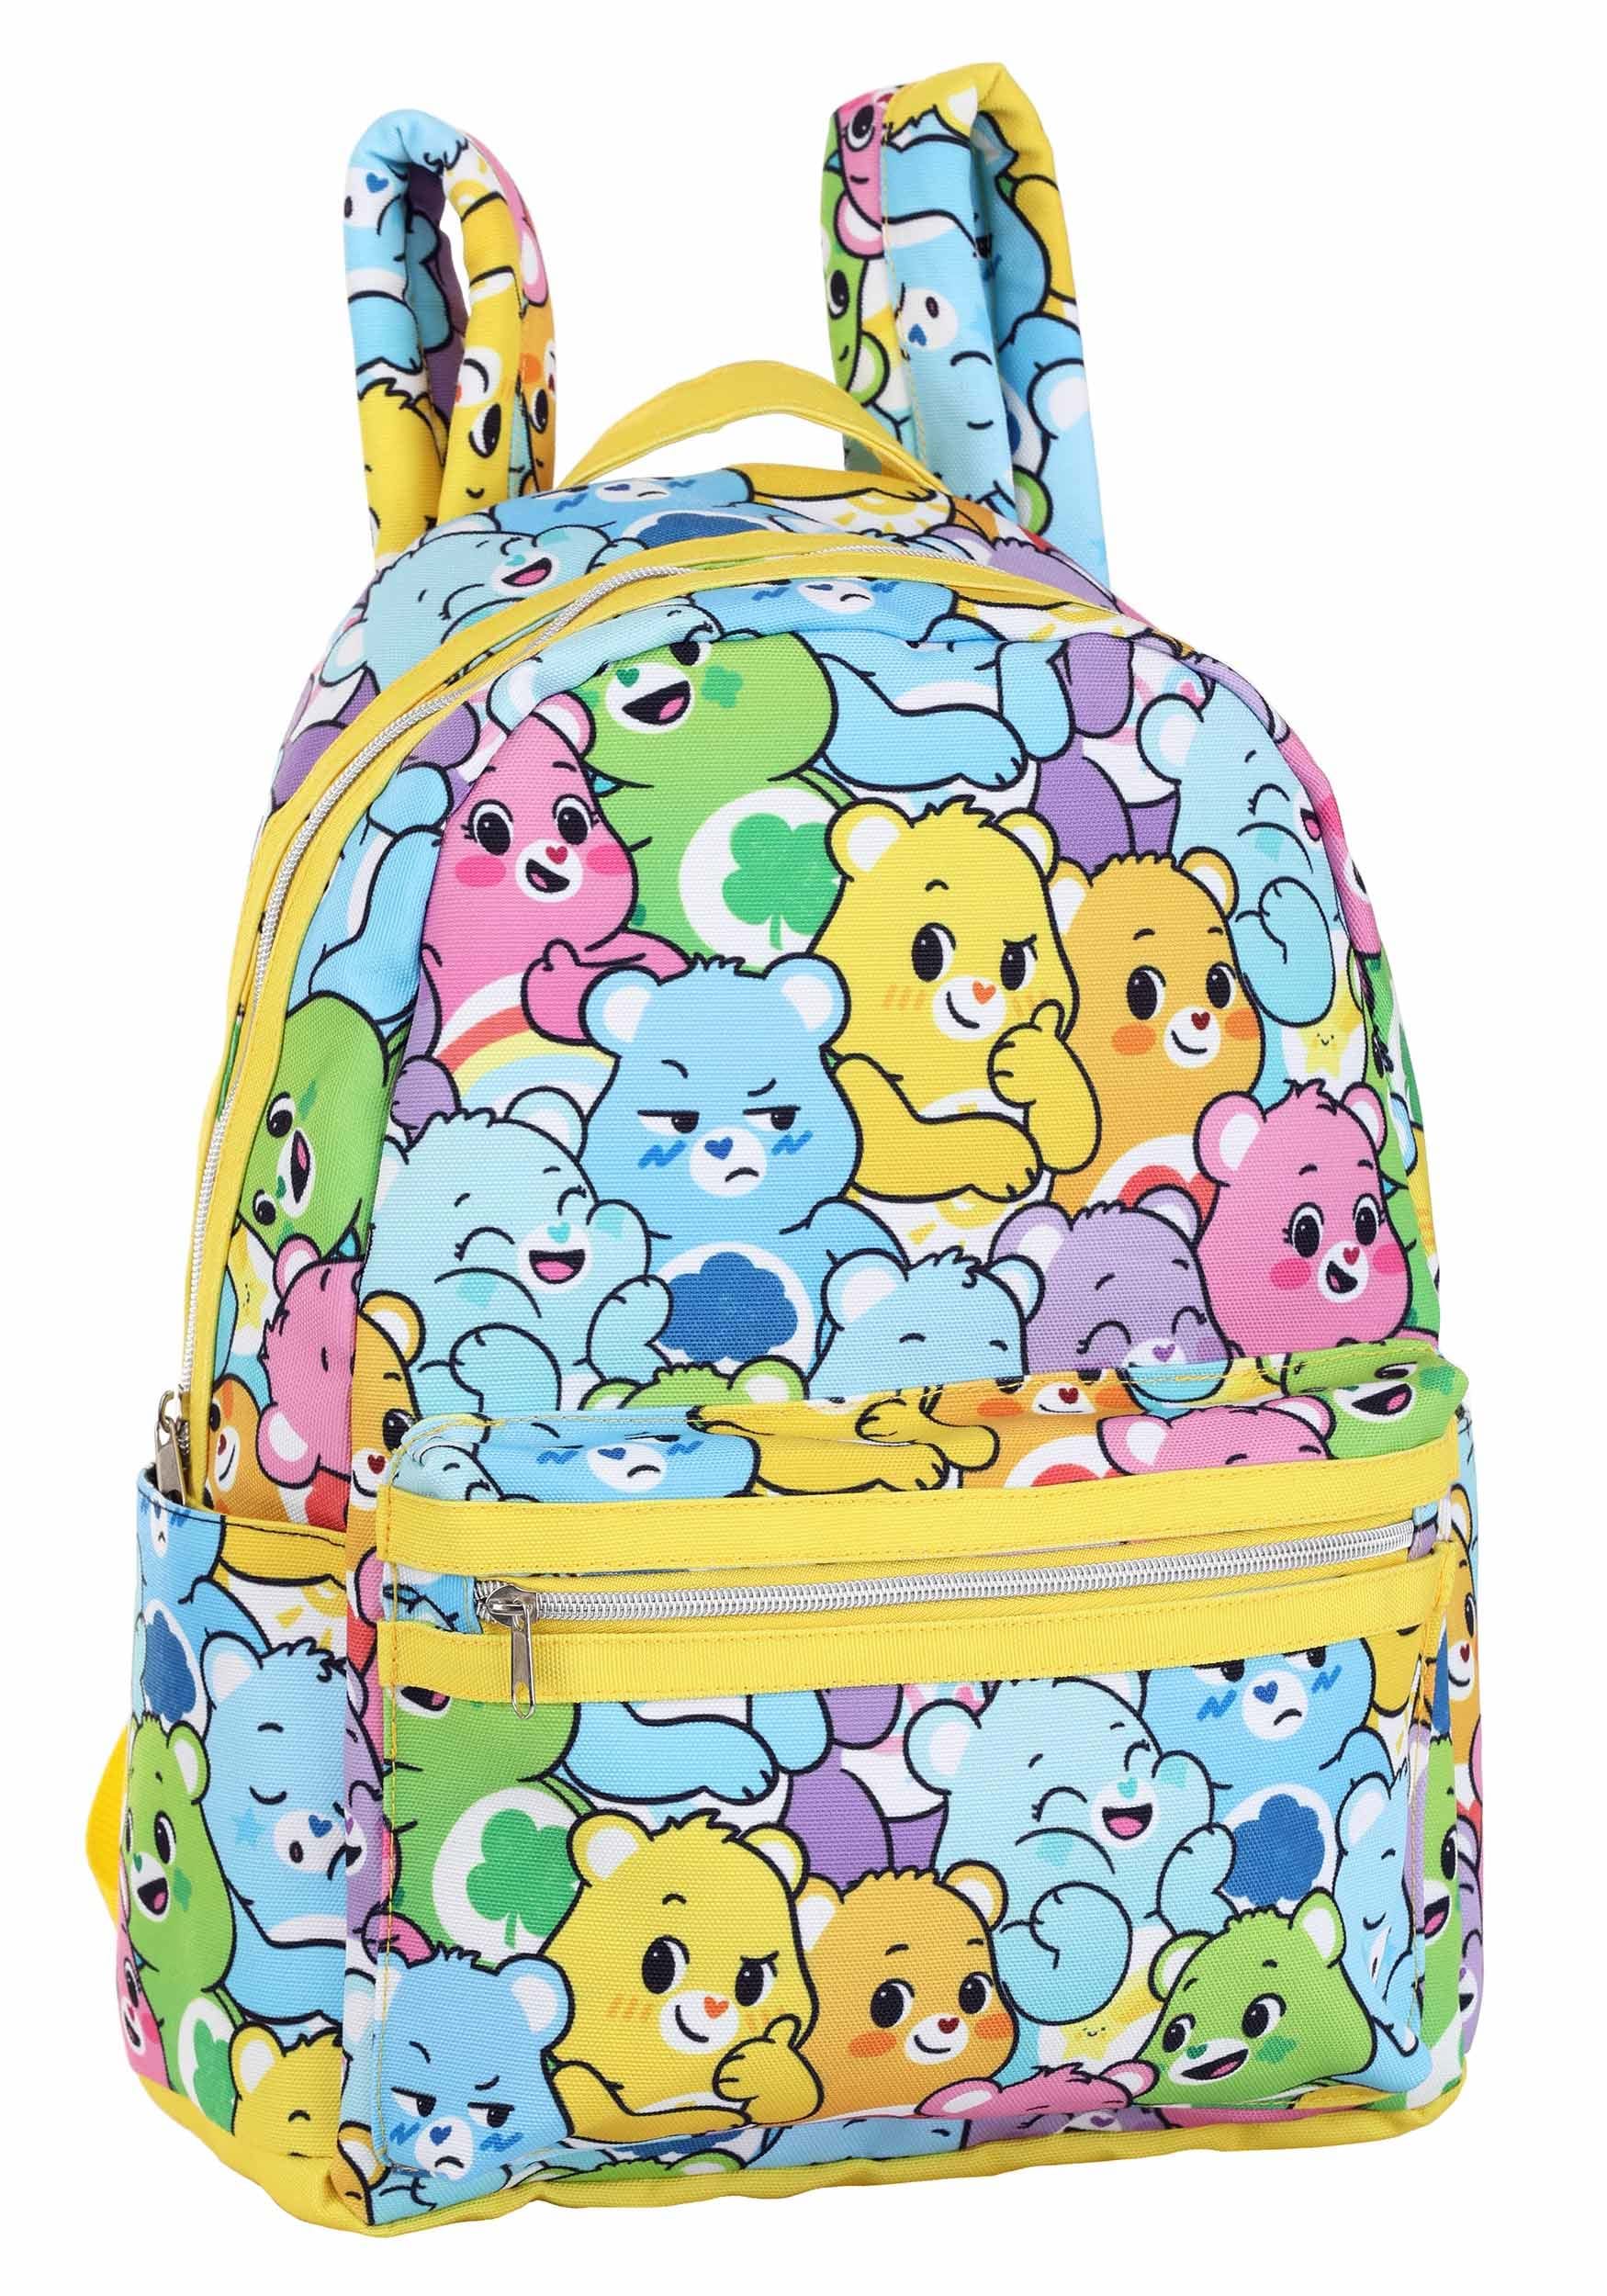 Care Bears All Over Print Backpack , Care Bears Accessories